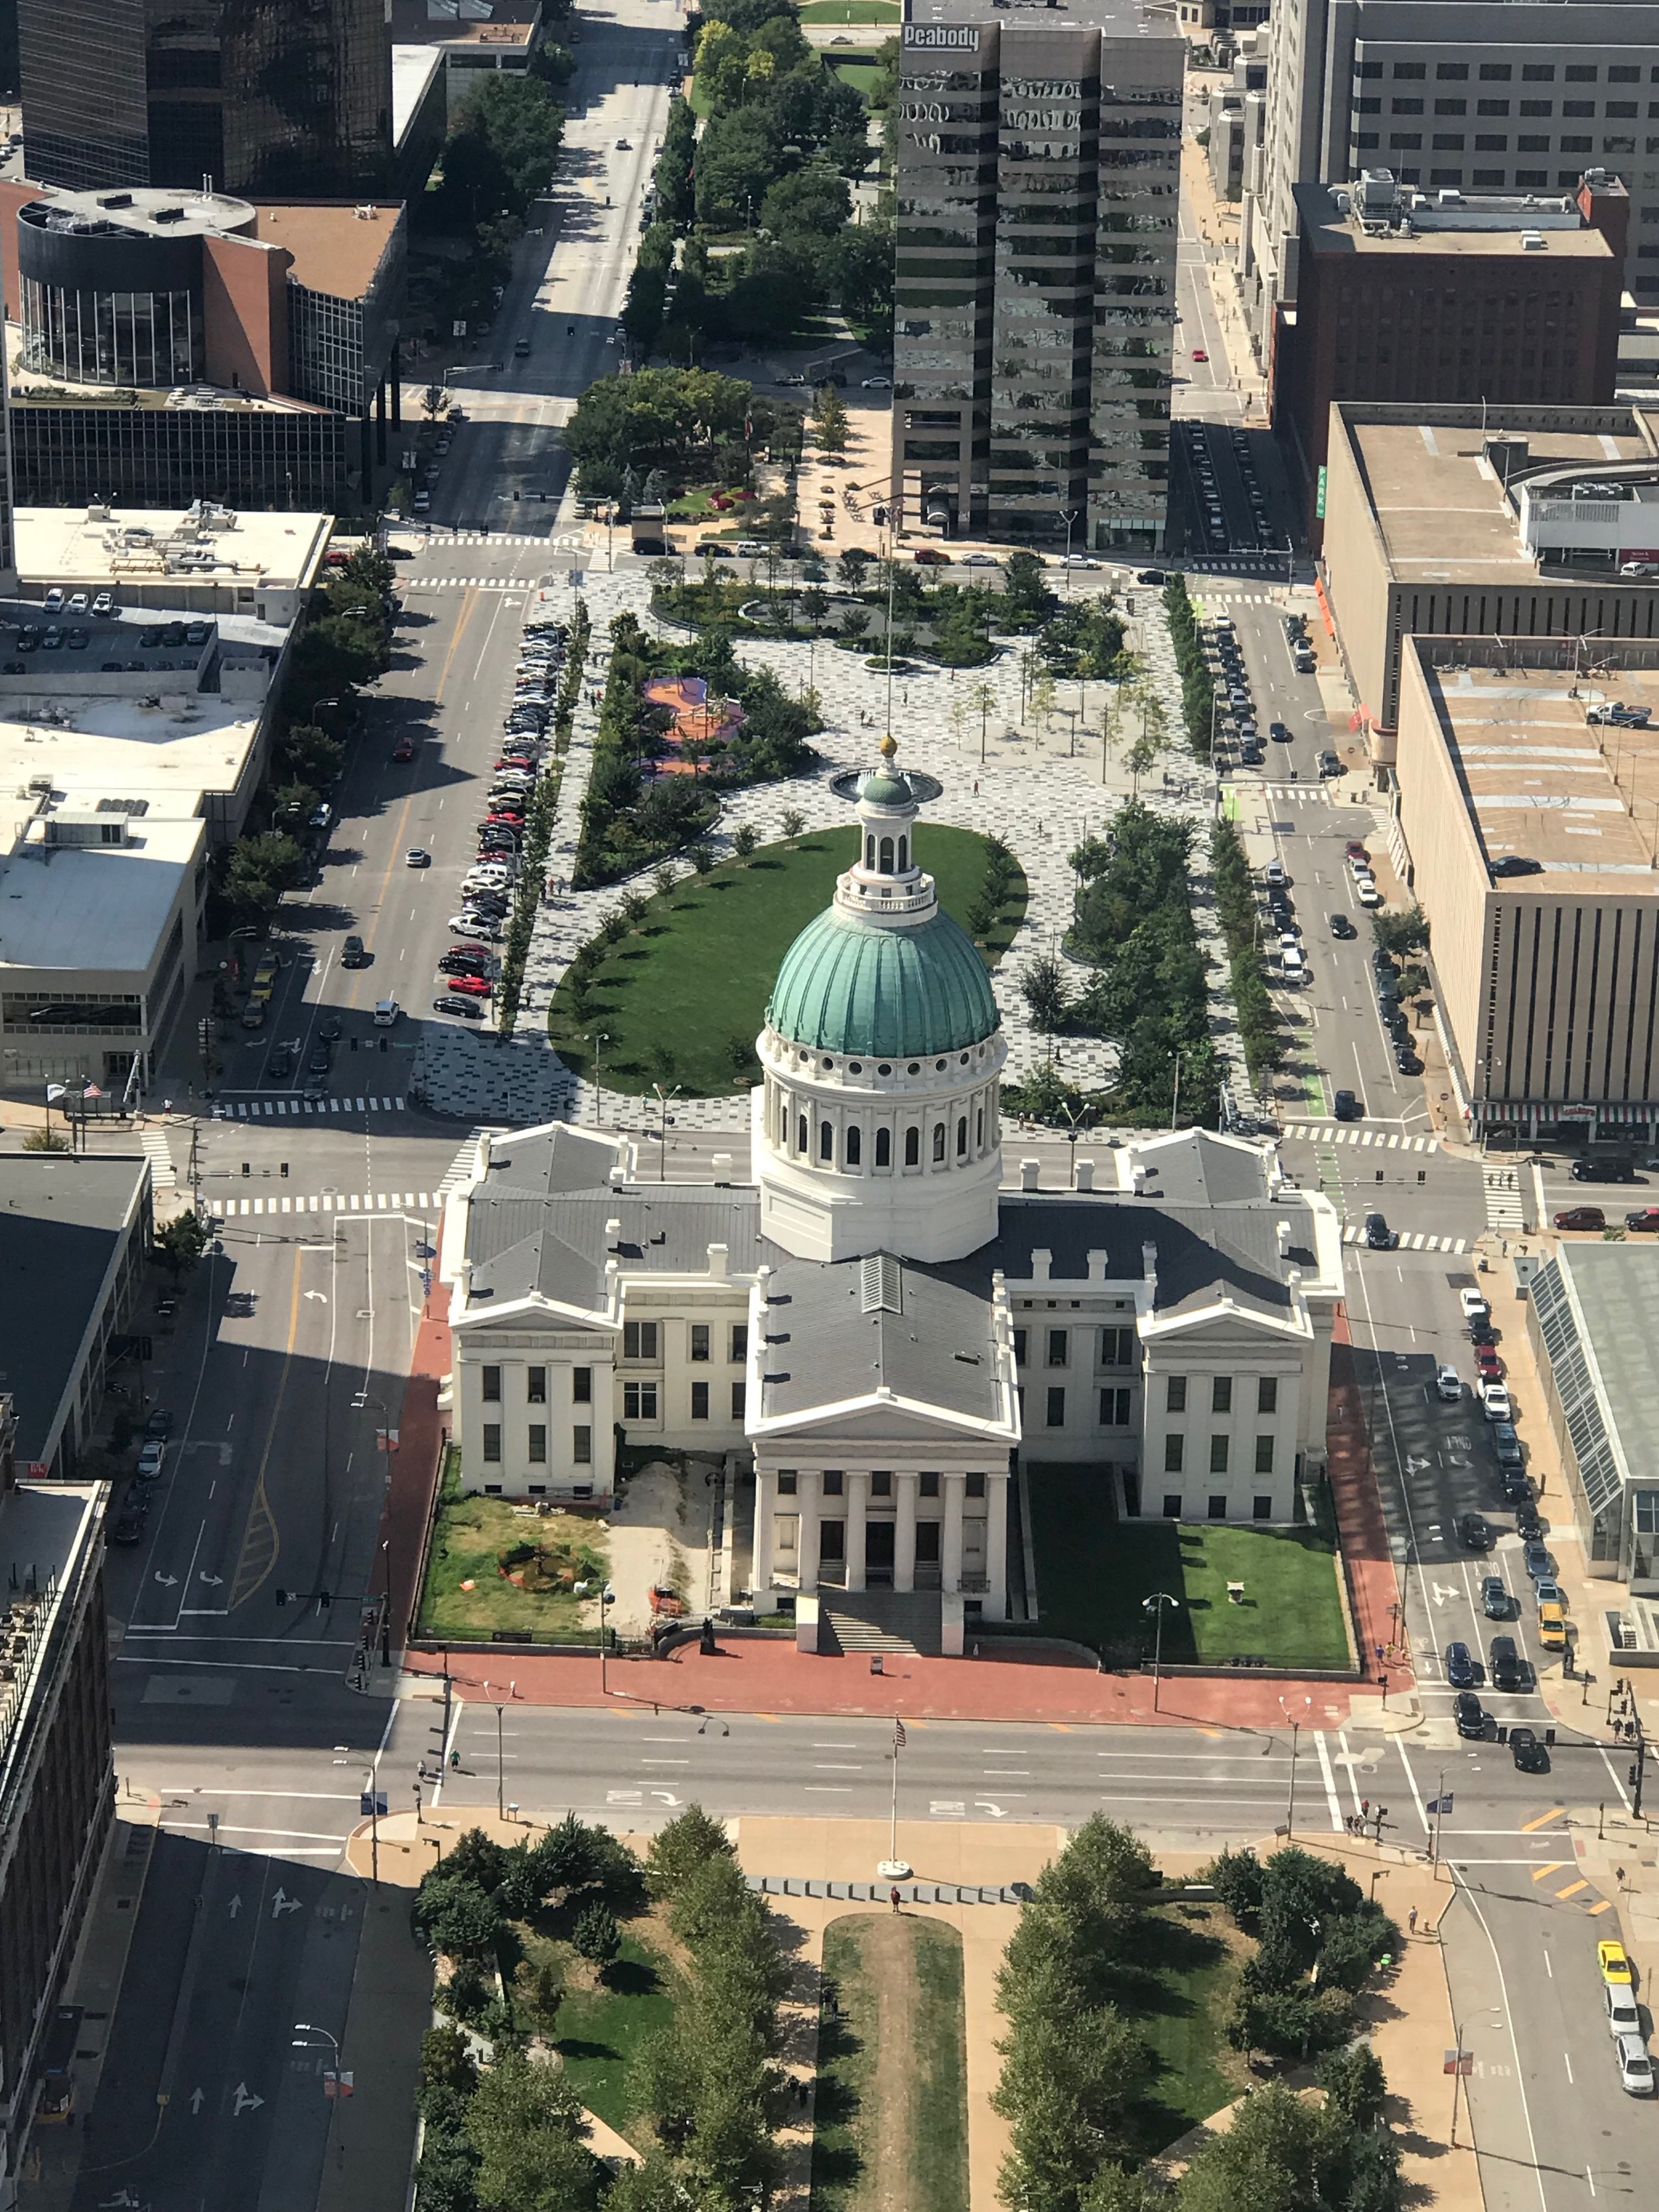 The Old St. Louis County Courthouse